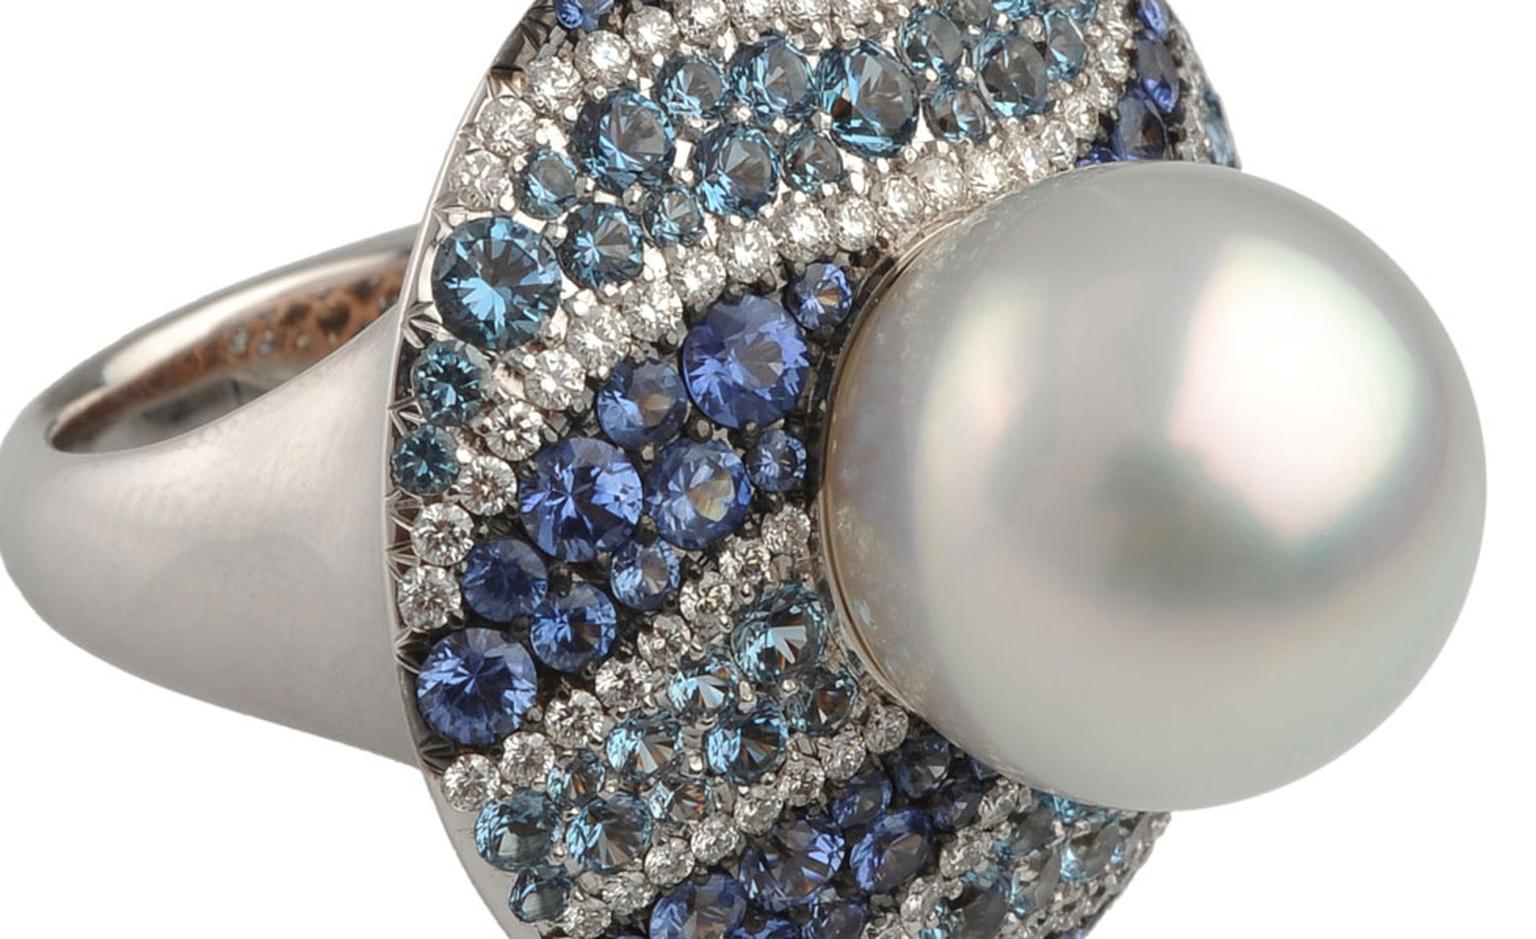 Close up of the Autore, Fire & Ice Iceberg white gold, South Sea pearl, diamond, blue sapphire and aquamarine ring. I love the waves of different shades of blue that ripple alongside the lustre of the pearl. $25,500 AUD